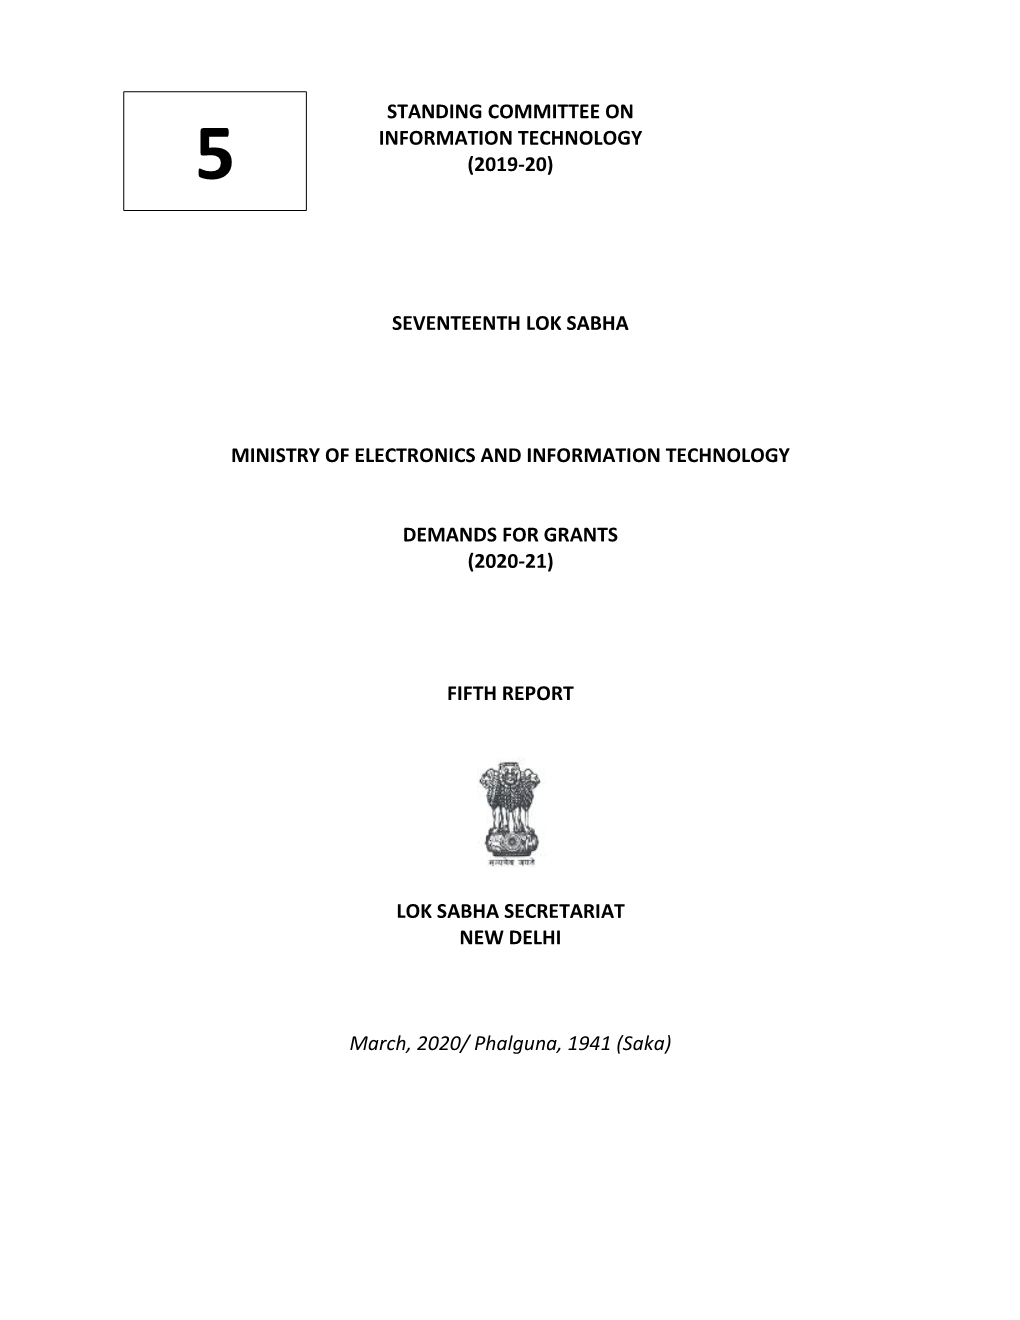 Standing Committee on Information Technology (2019-20) Seventeenth Lok Sabha Ministry of Electronics and Information Technology